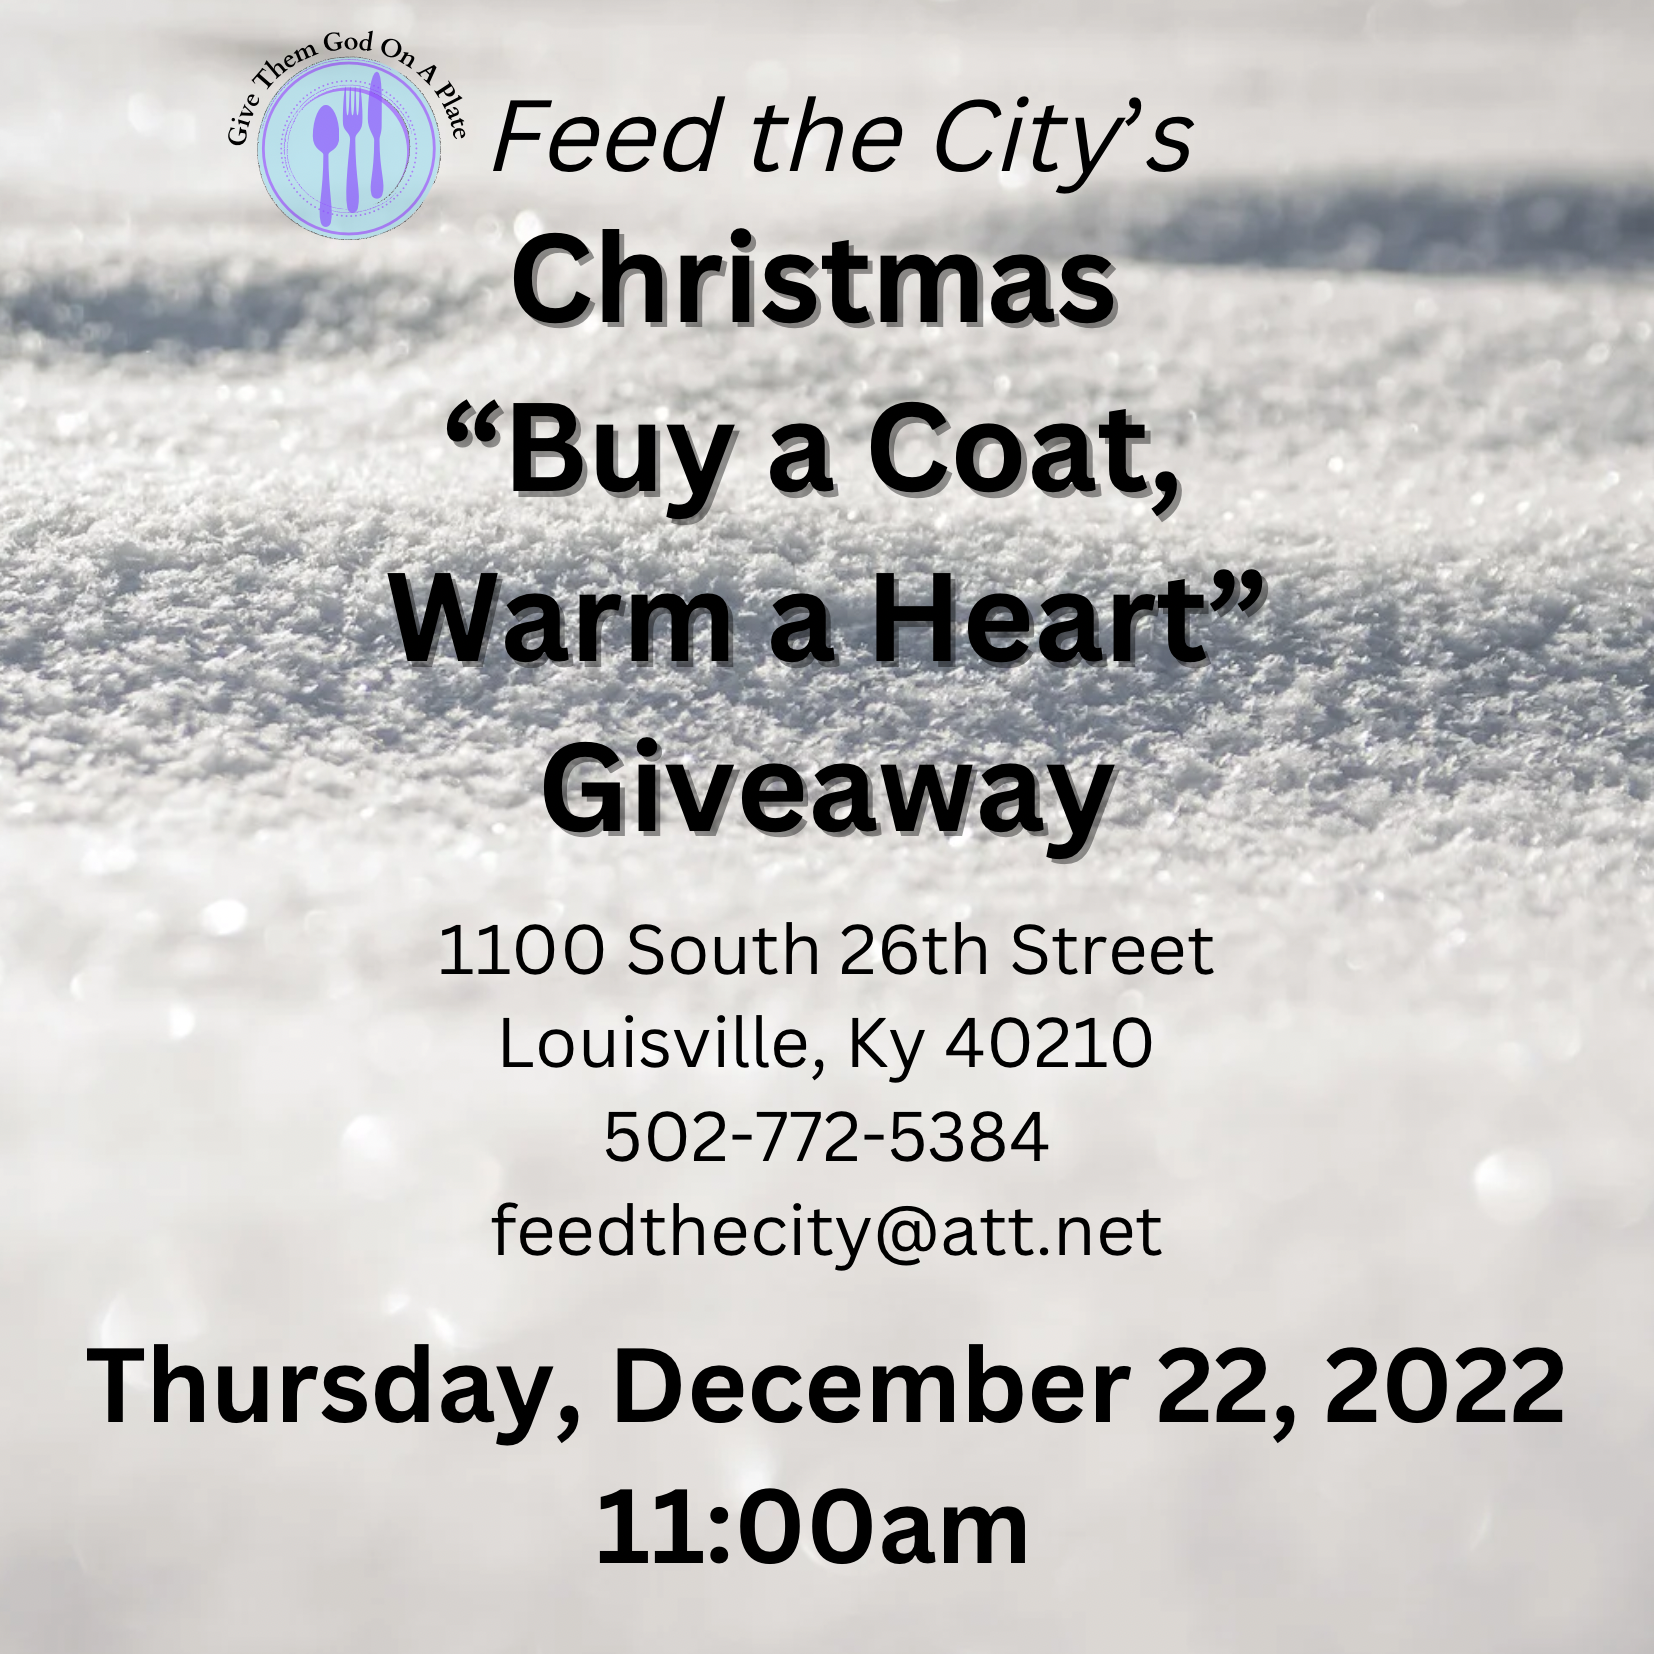 <h1 class="tribe-events-single-event-title">Feed the City’s Christmas “Buy a Coat, Warm a Heart” Giveaway</h1>